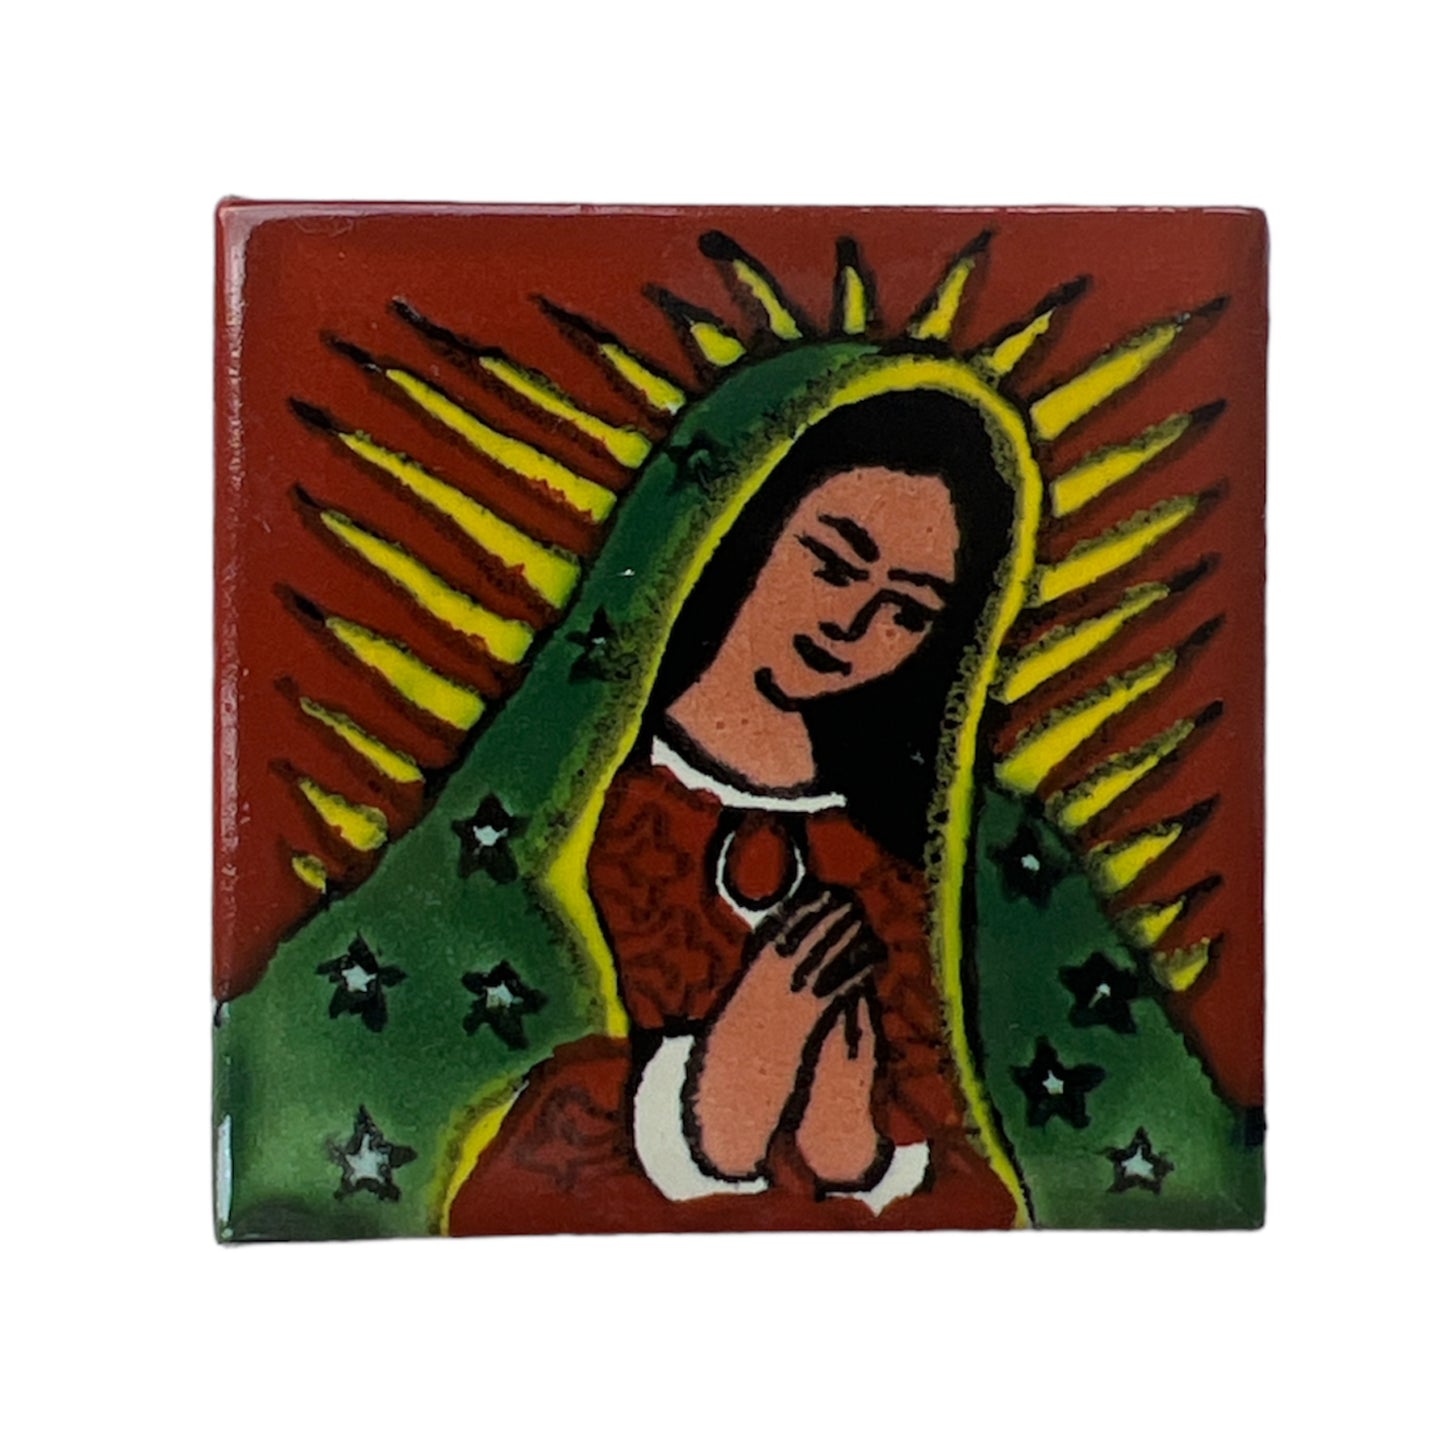 1.25” Hand Painted Lupe Spanish Tile Magnet